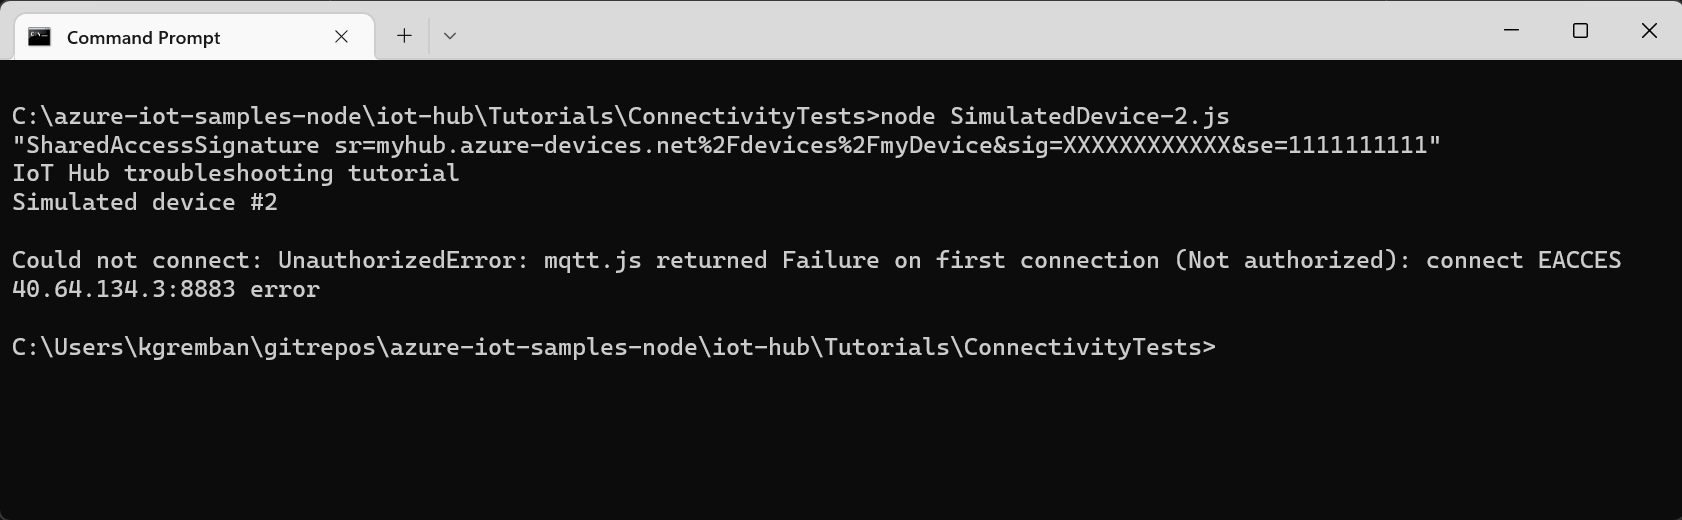 Screenshot that shows a connection error when the outbound port is blocked.